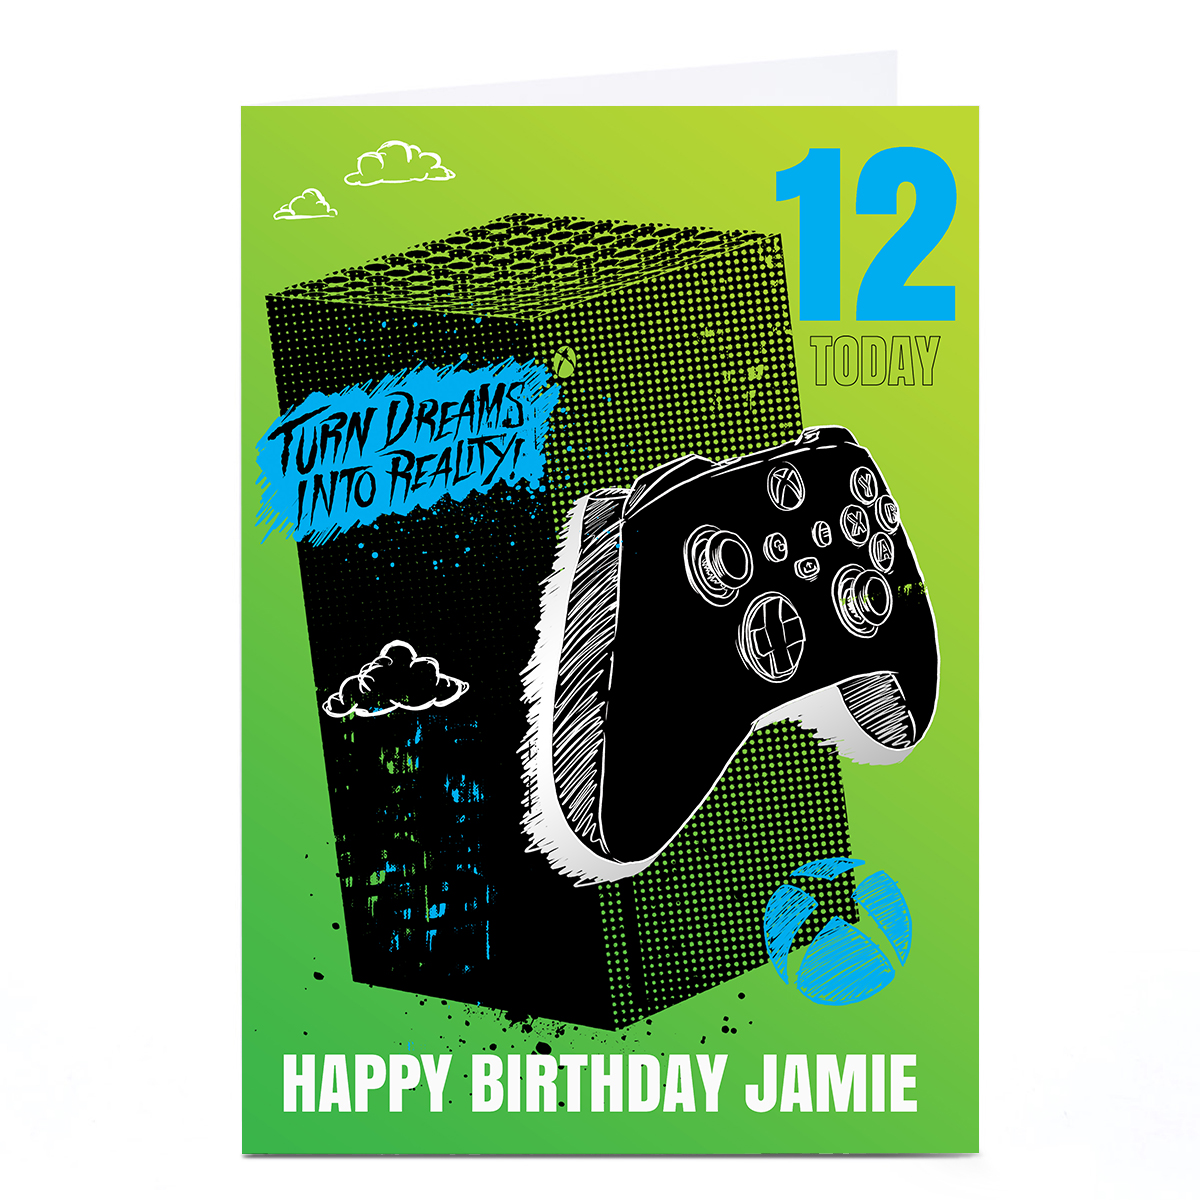 Personalised Xbox Birthday Card - Turn Dreams Into Reality